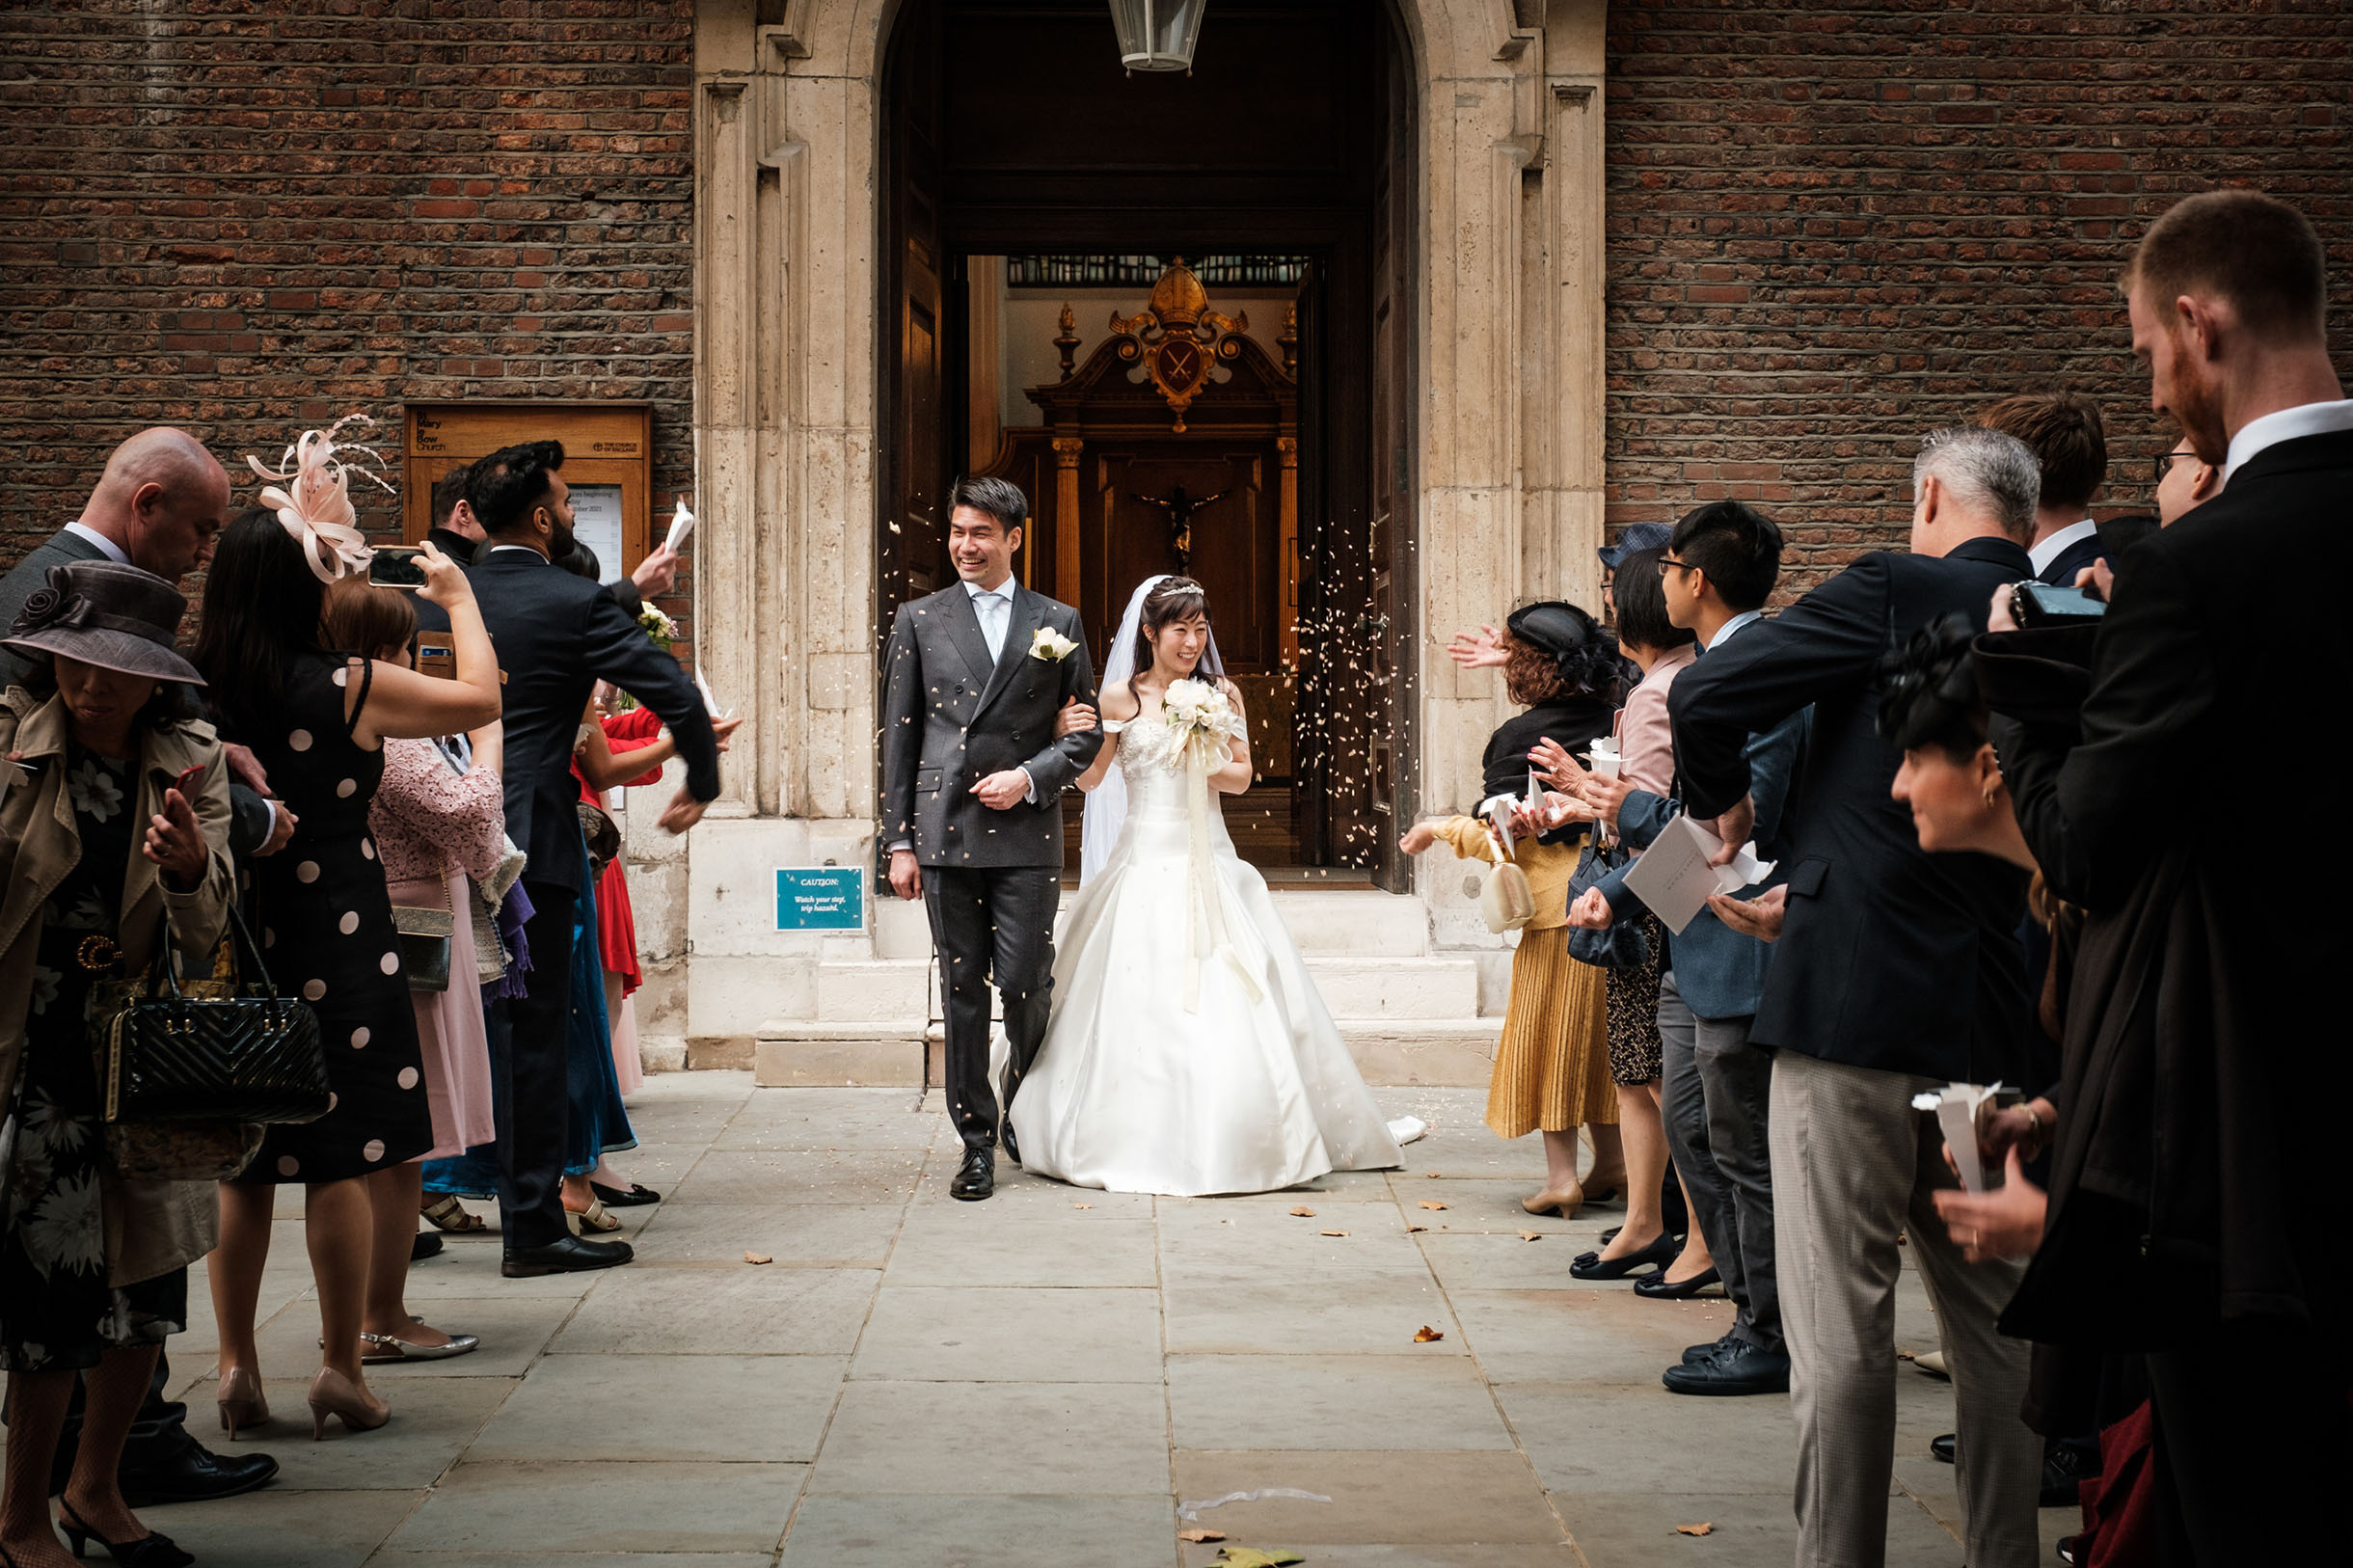 newly wed couple getting out of the church, meeting their friends and family members, celebrating and walking amongst them, wedding photography image.